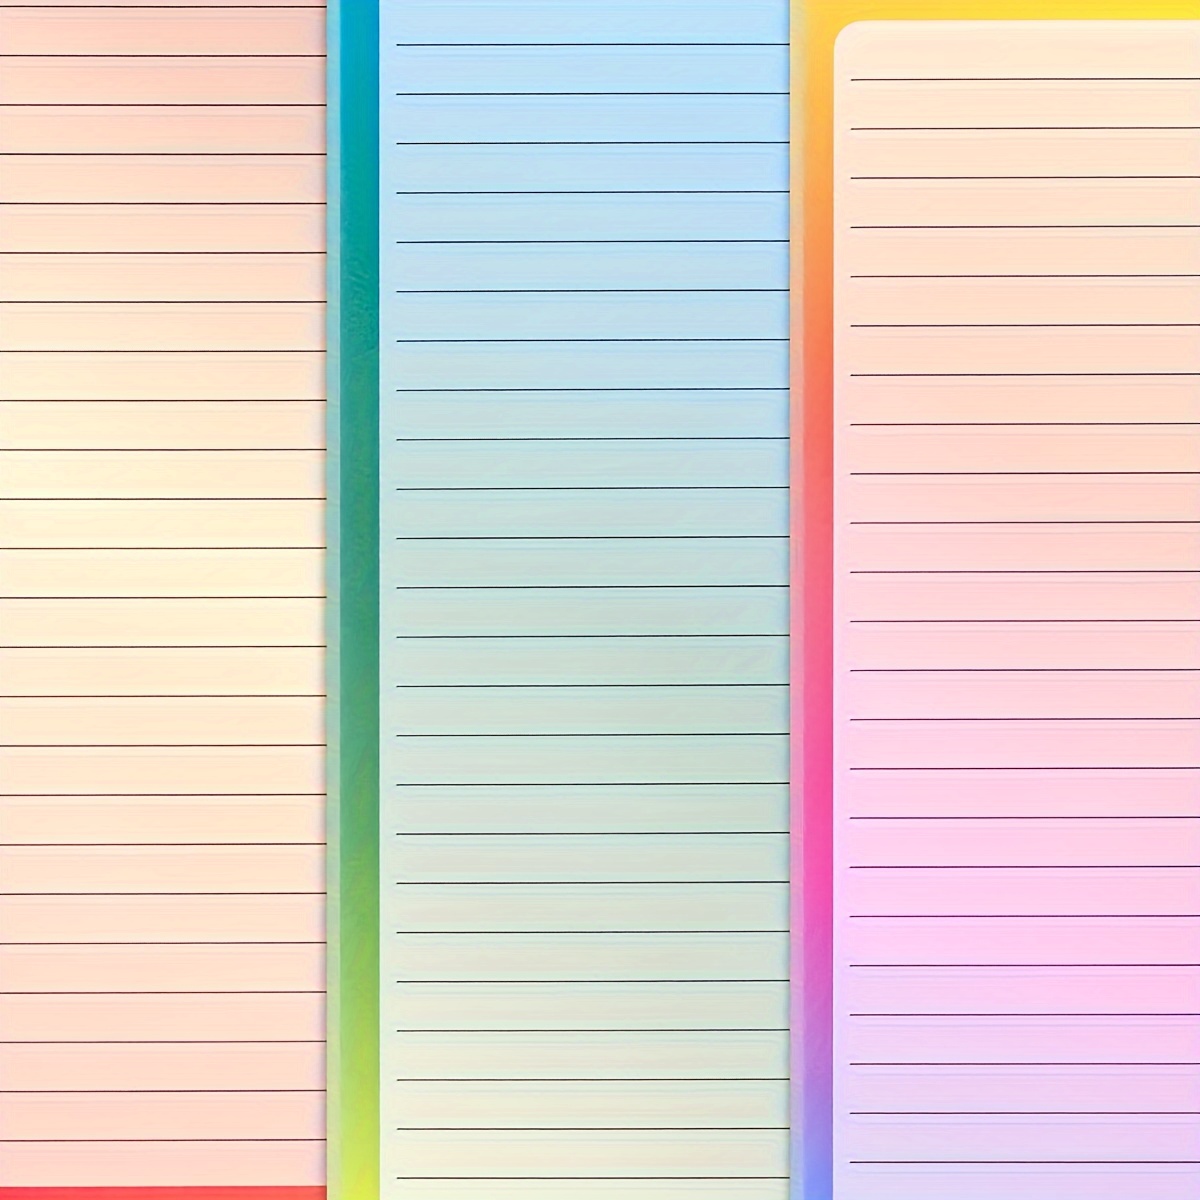 

3pcs Magnetic Notepads For Refrigerator, 100 Sheets Per Pad Gradient Color Grocery List Note Pad For Fridge, To-do Memos, Shopping List, Reminders, 8 X 3 Inch